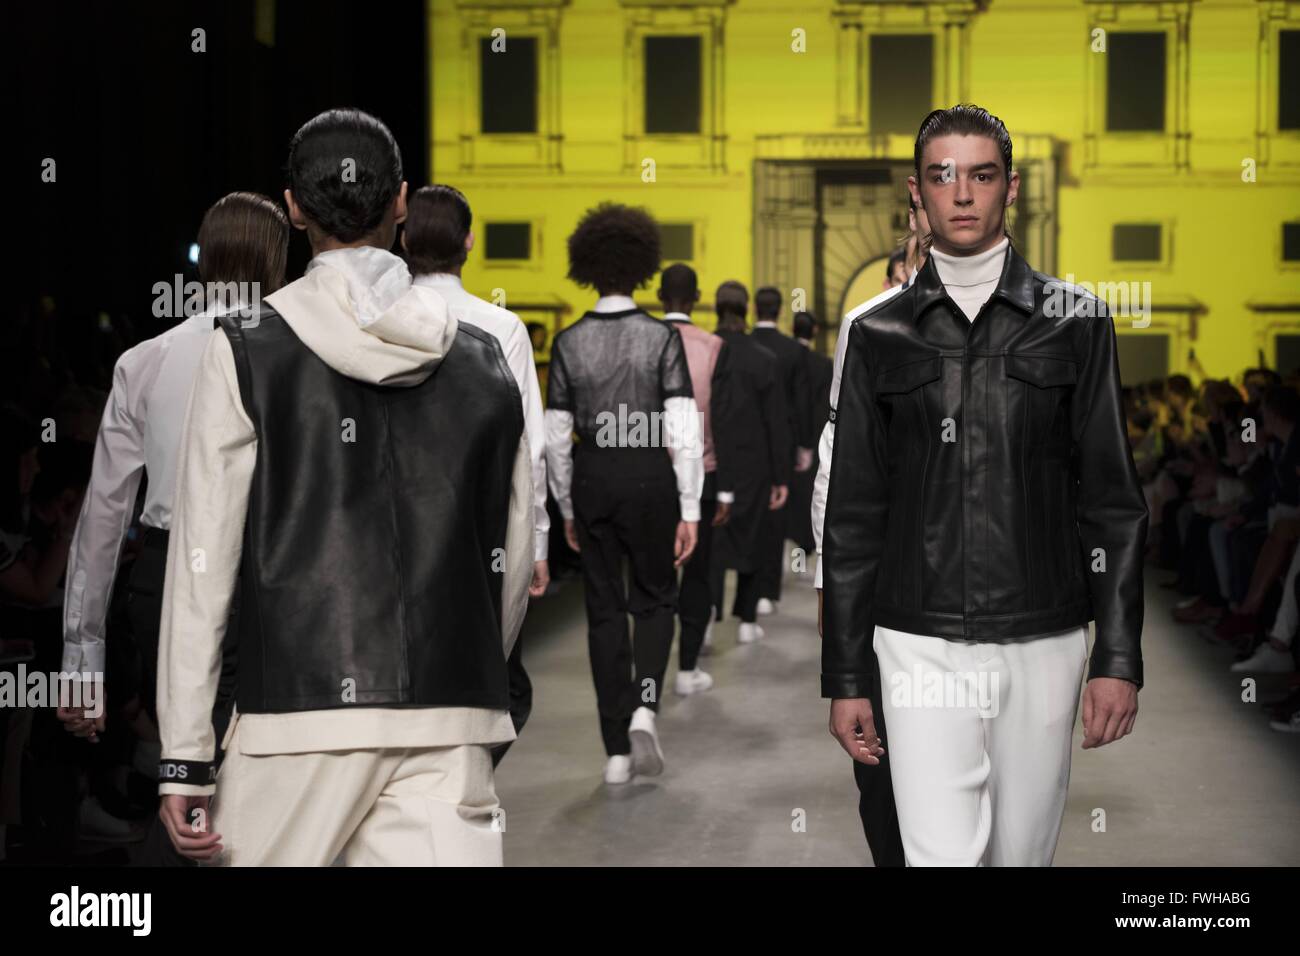 Tiger of Sweden runway at London Collections Men SS17, LCM SS17. 11/06/2016 | usage worldwide Stock Photo